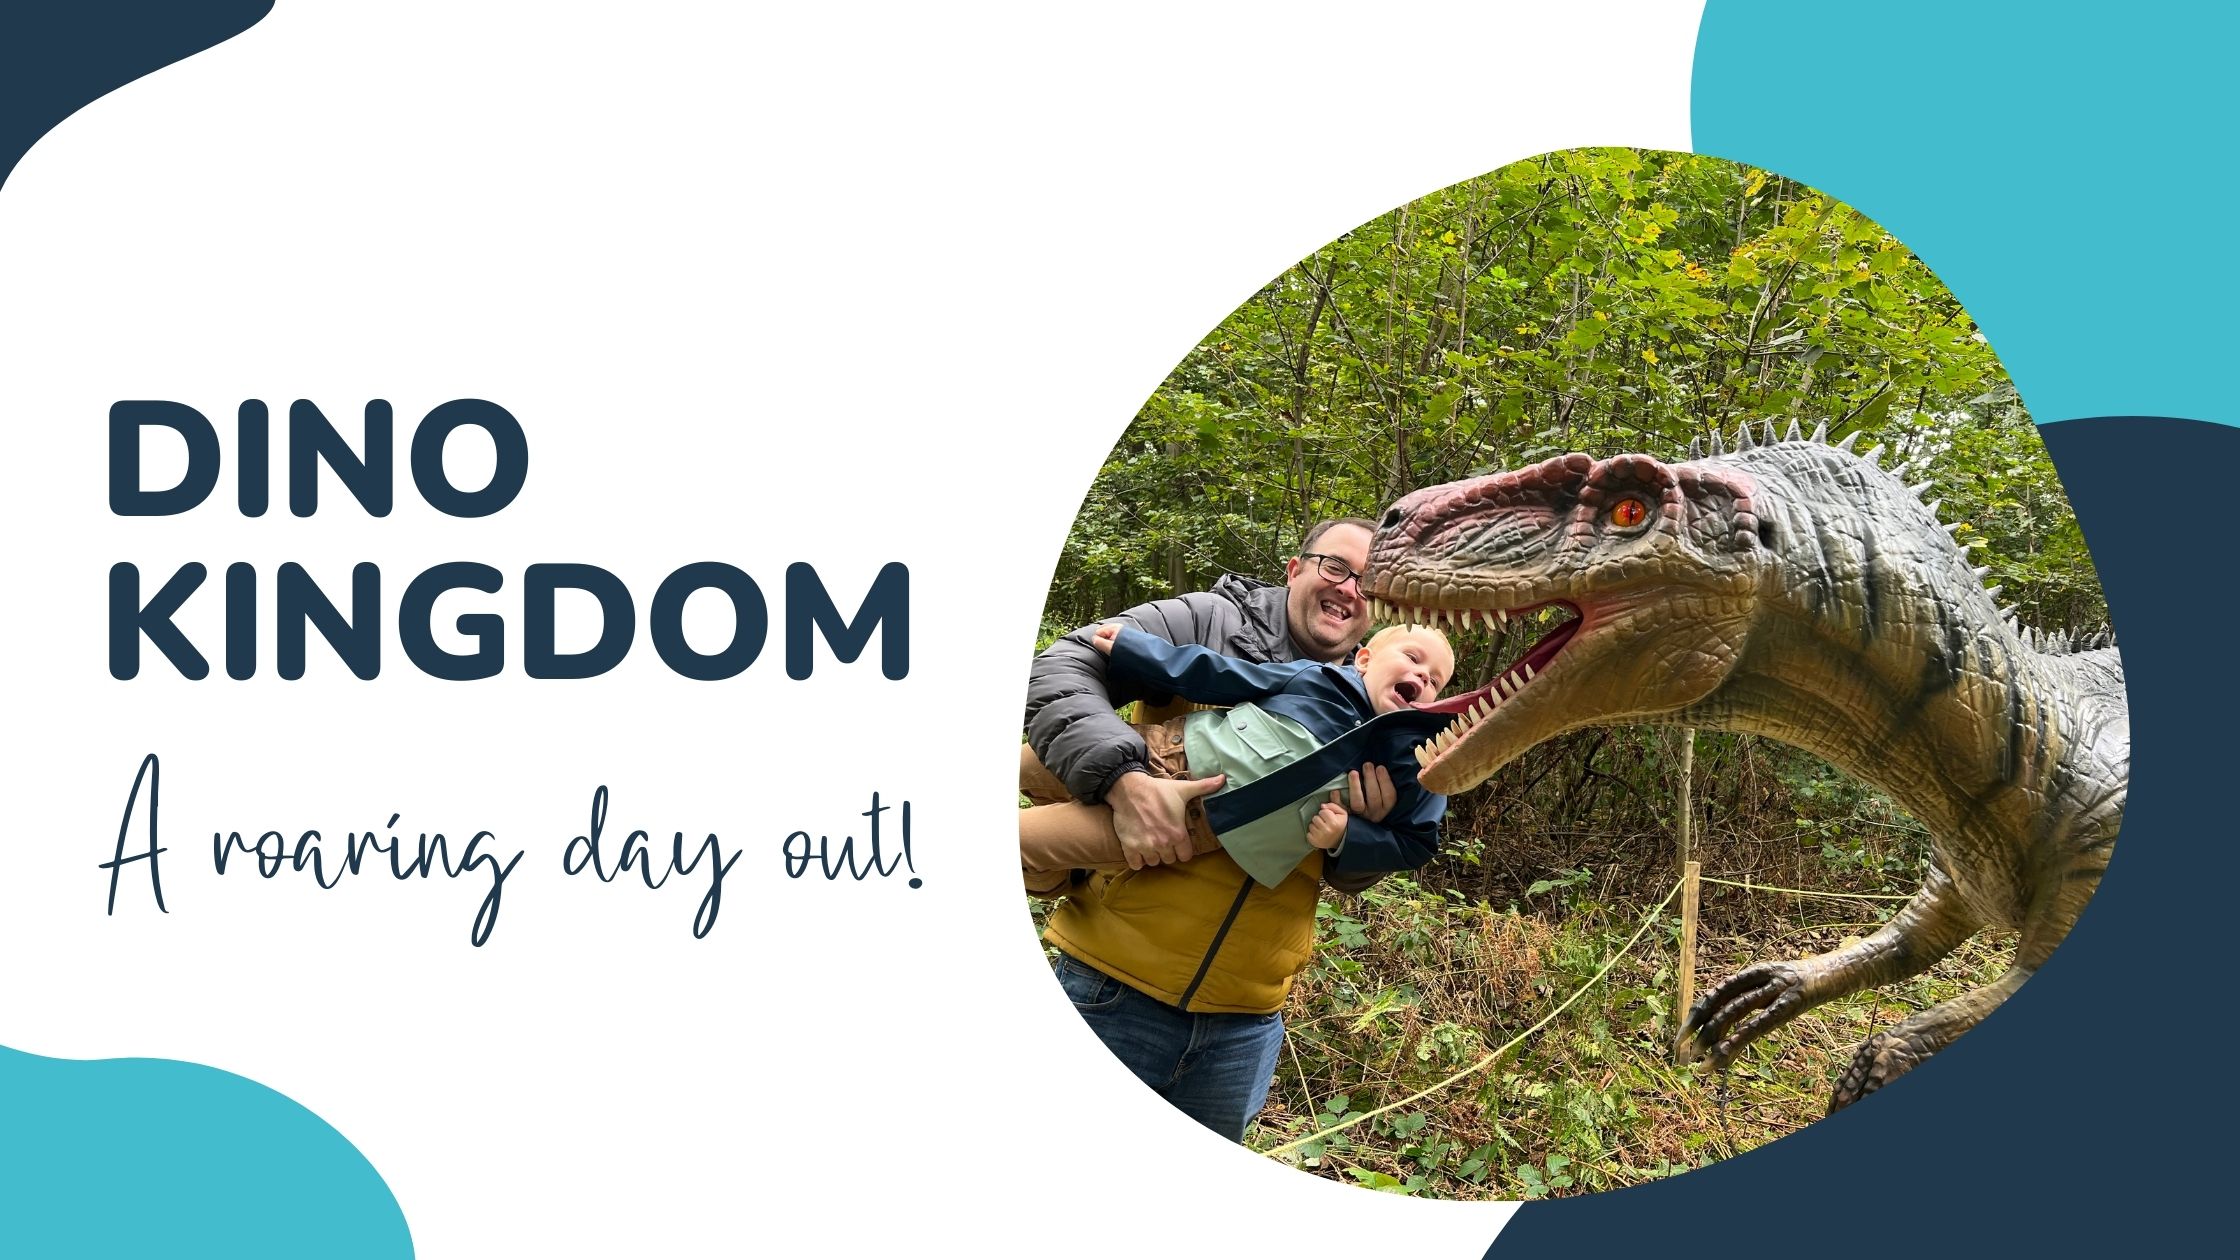 A roaring day out at Dino Kingdom